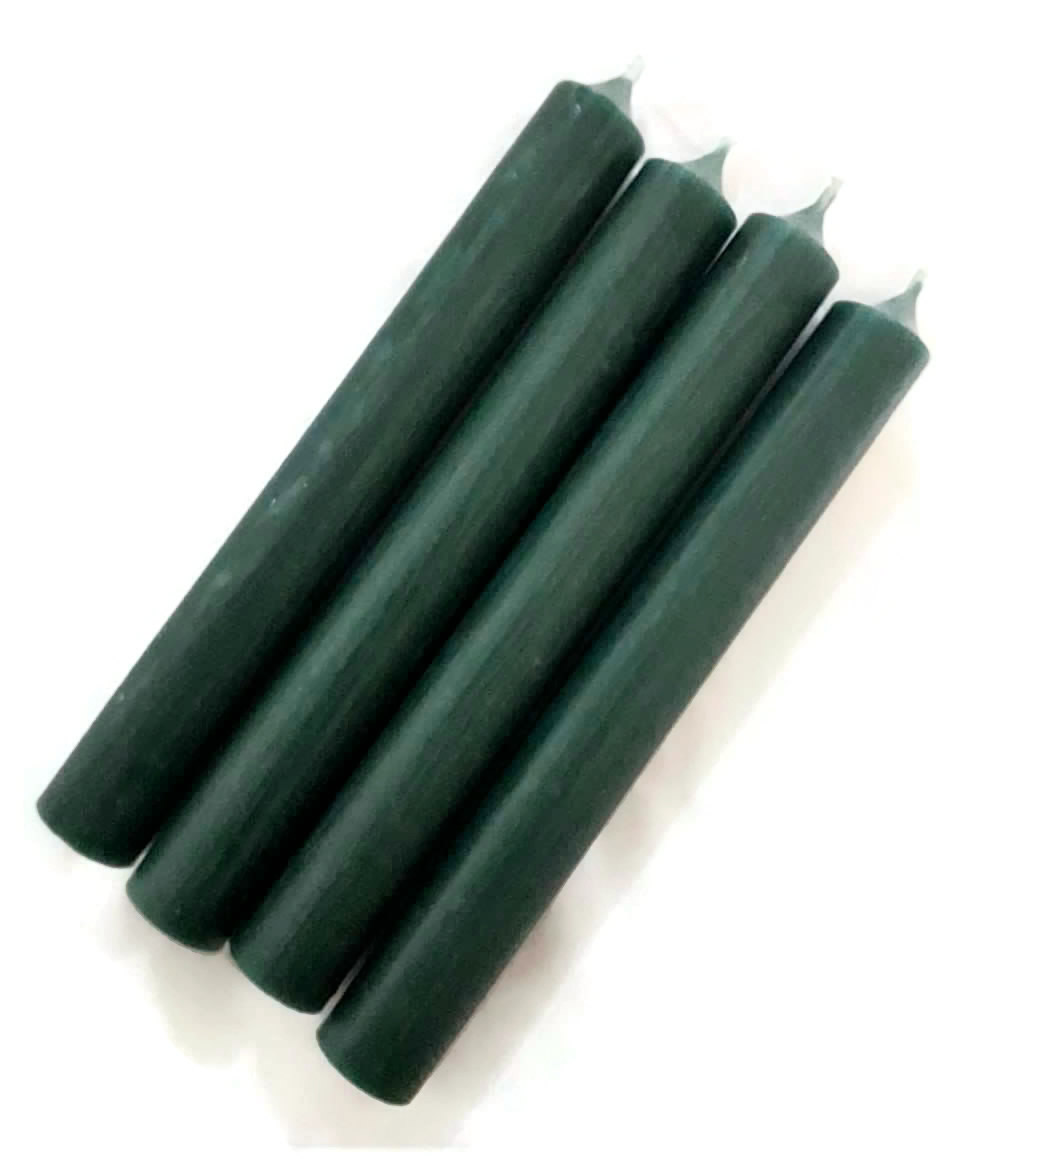 Green Solid Colour 7 Inch Candles